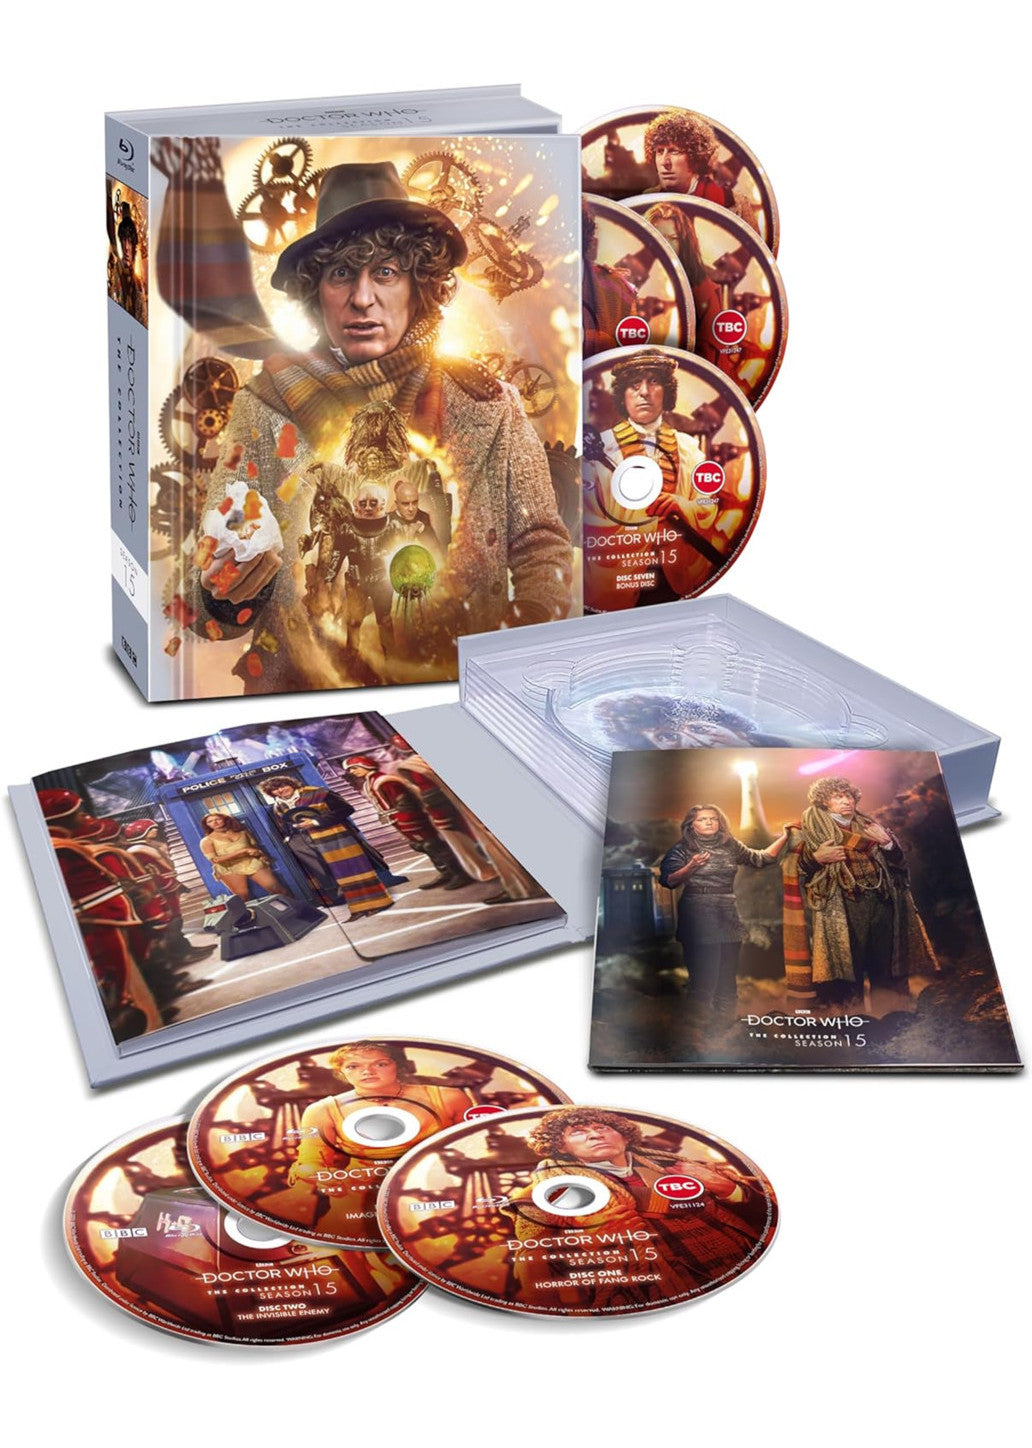 DOCTOR WHO: THE COLLECTION SEASON 15 (LIMITED EDITION BLU-RAY)